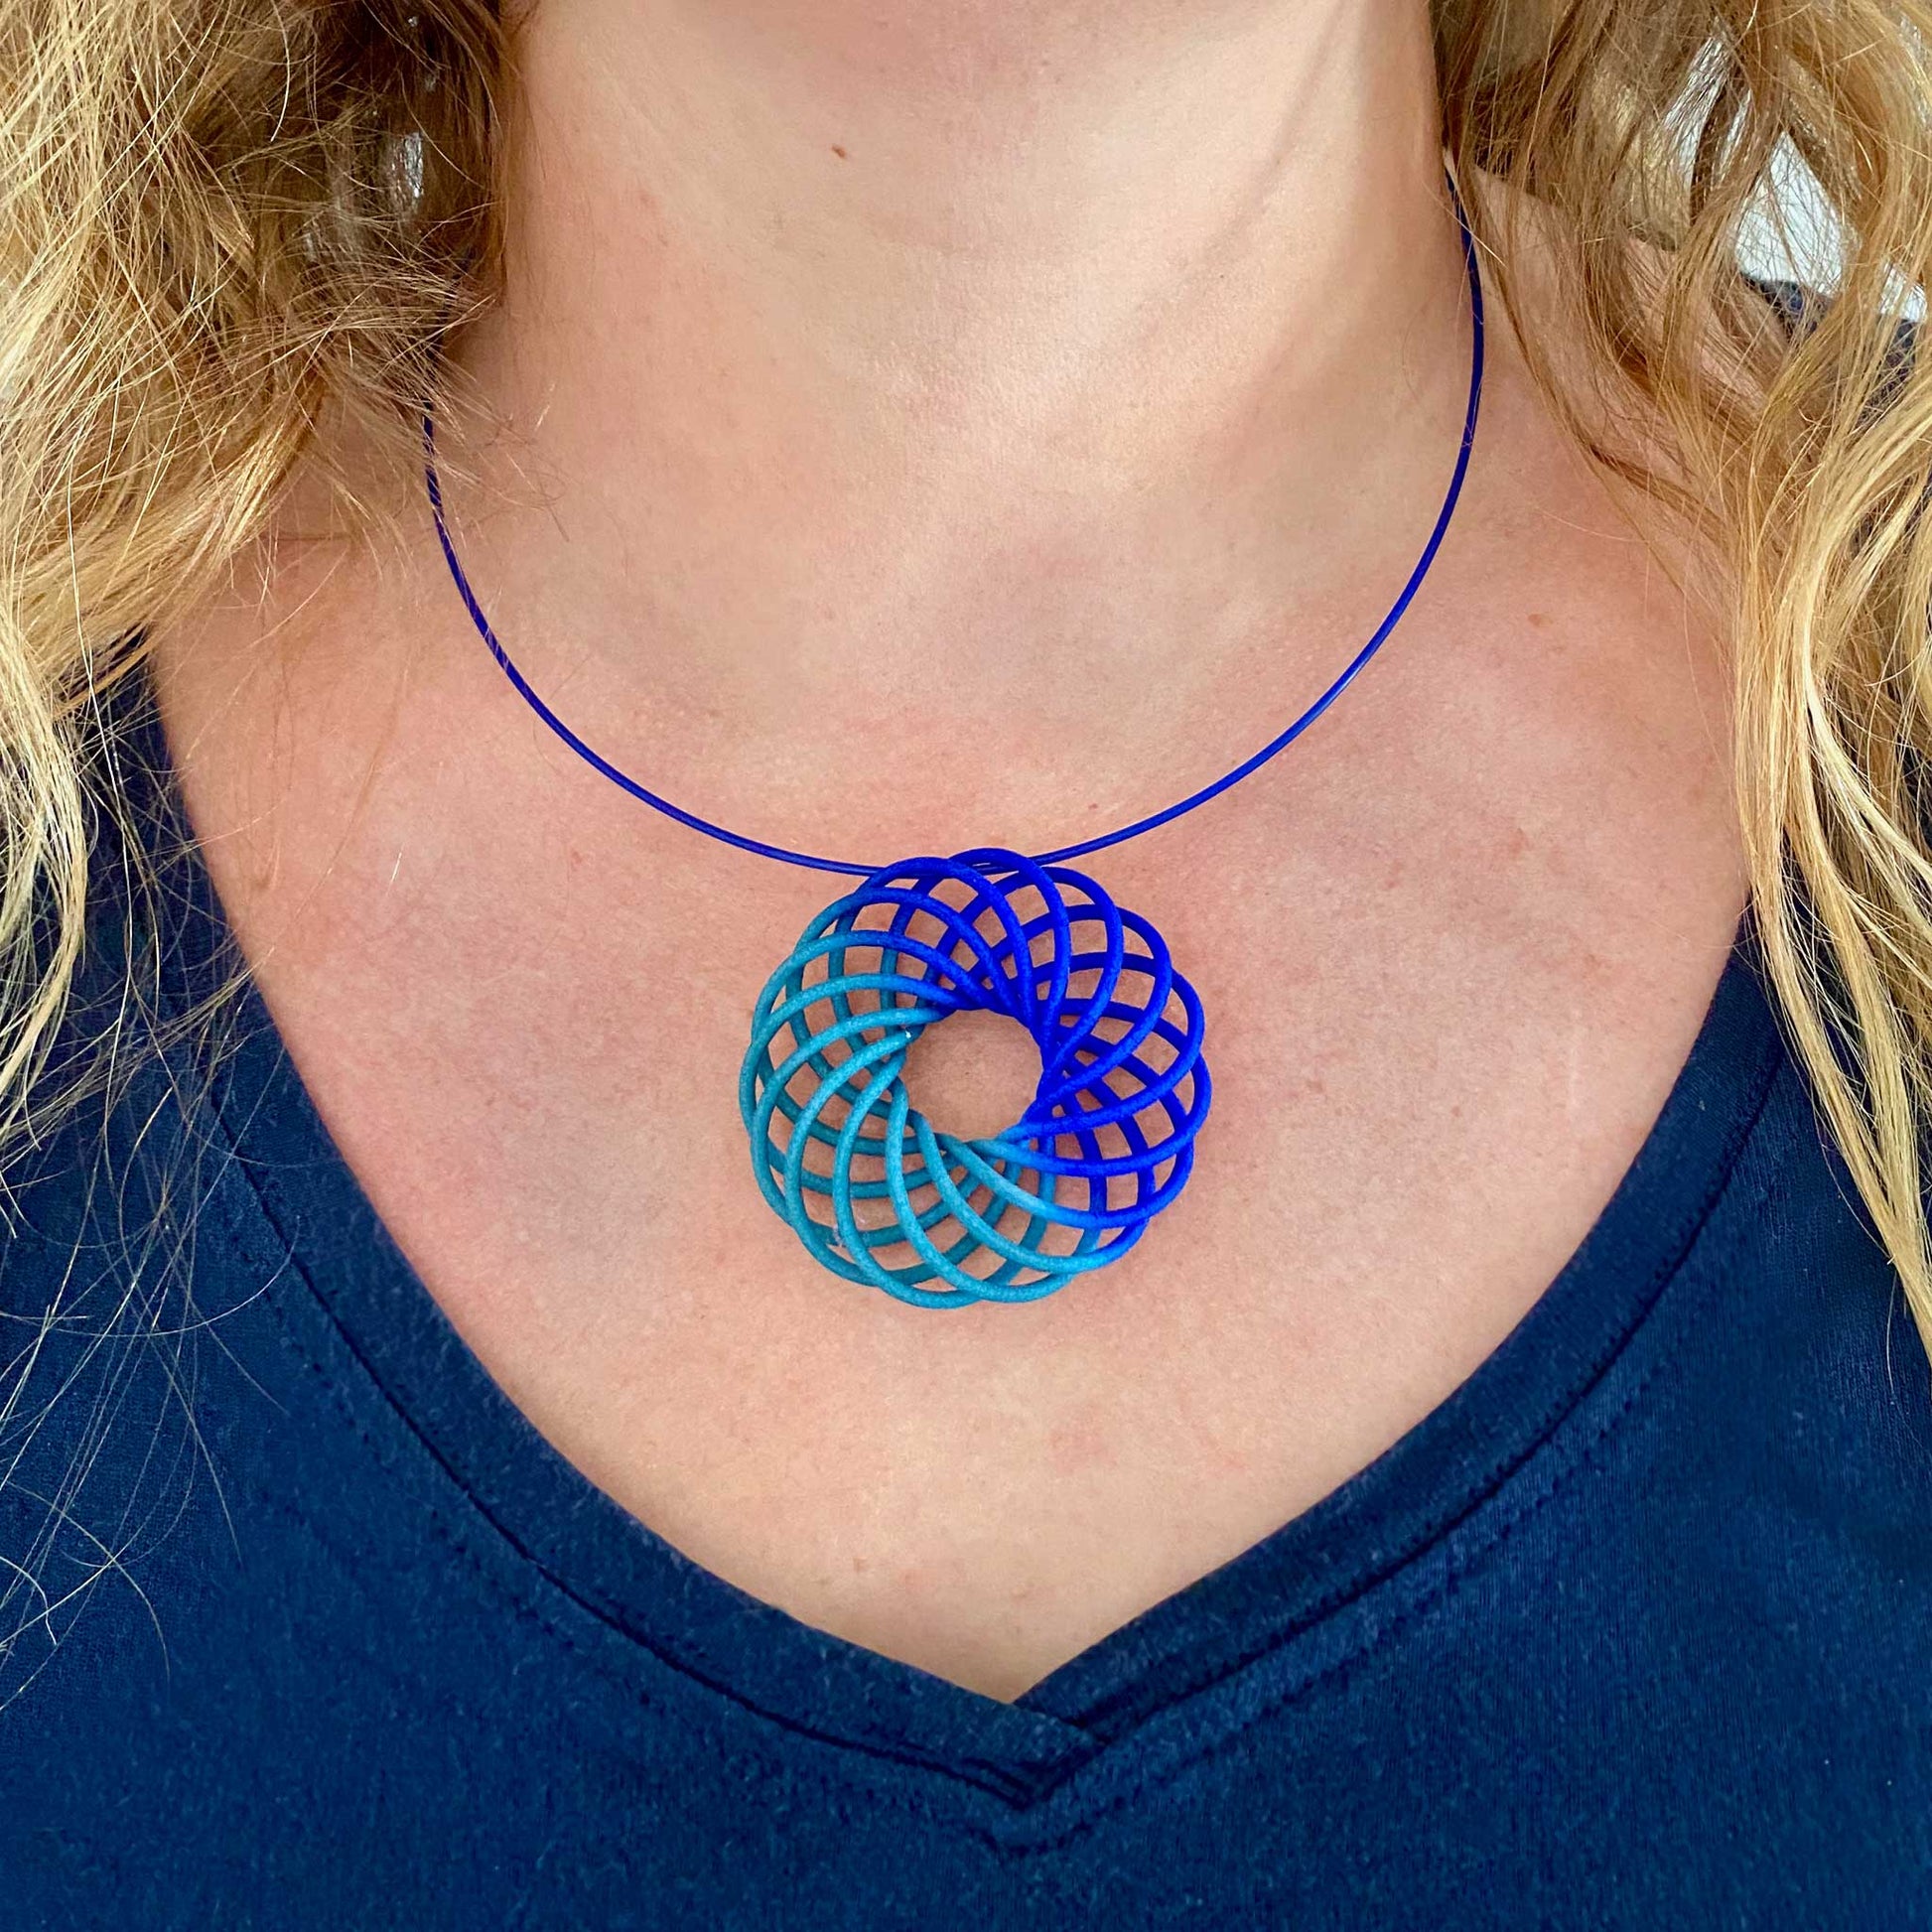 Katy wearing the Vortex 3D printed nylon pendant in blue to teal fade colour way by Katy Luxton